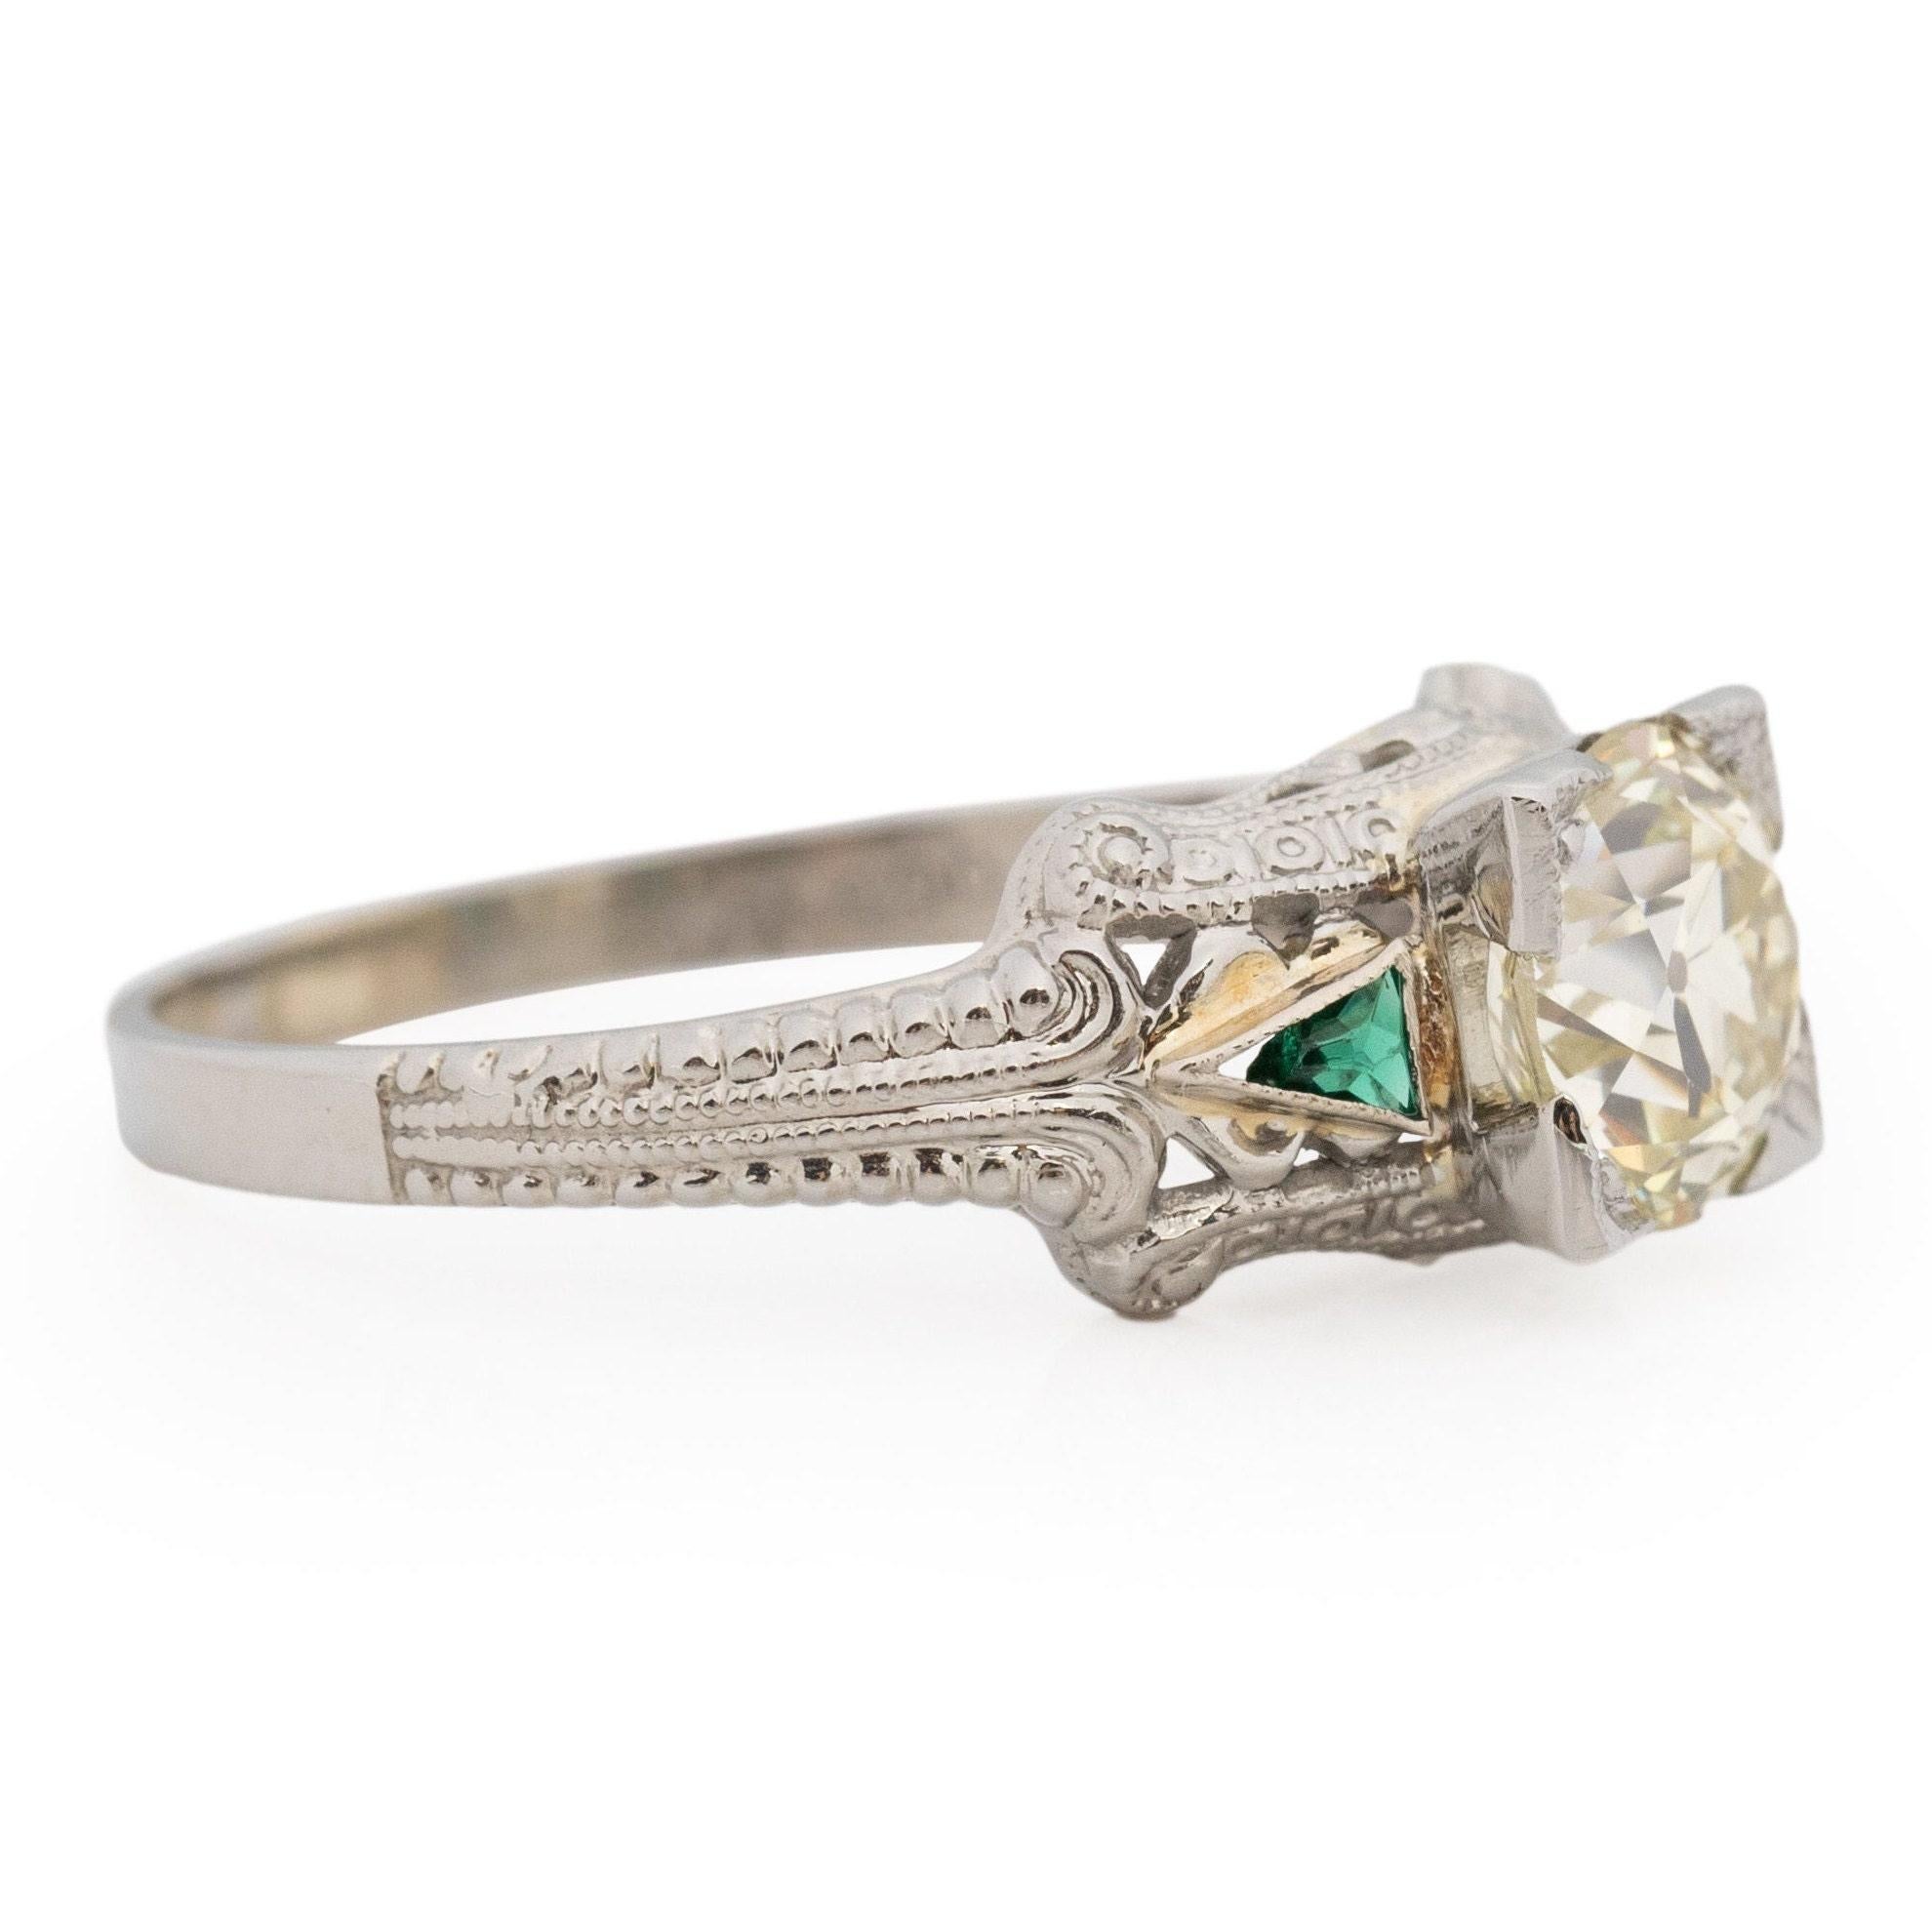 Presenting a splendid illustration of Art Deco craftsmanship, this ring is a true marvel. Its intricate details have been impeccably preserved, showcasing minimal signs of age. Constructed from 18K white gold, the ring's shank tapers gracefully,